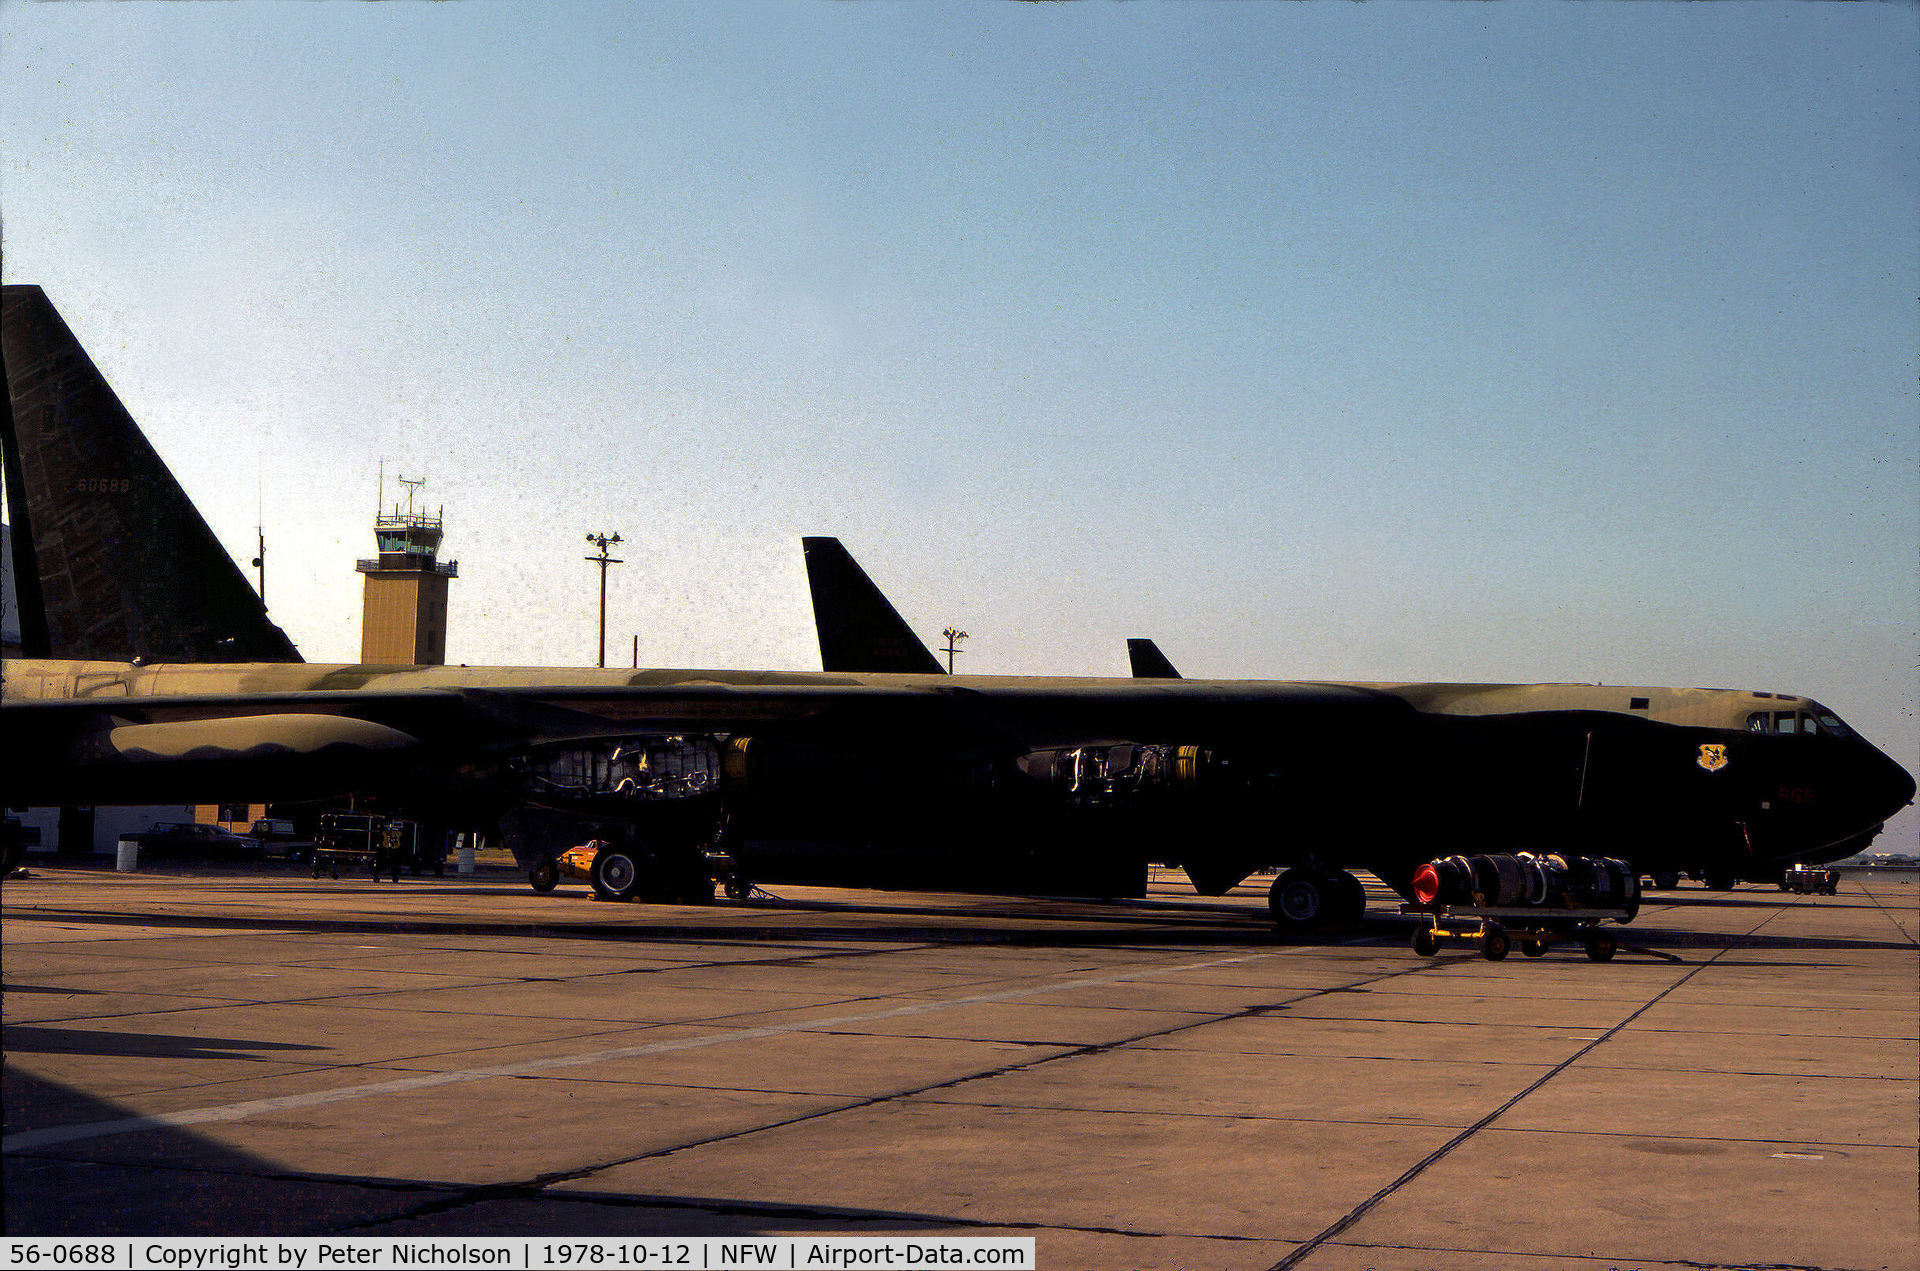 56-0688, 1956 Boeing B-52D Stratofortress C/N 464059, B-52D Stratofortress of 7 Bomb Wing on the ramp at Carswell AFB in October 1978.